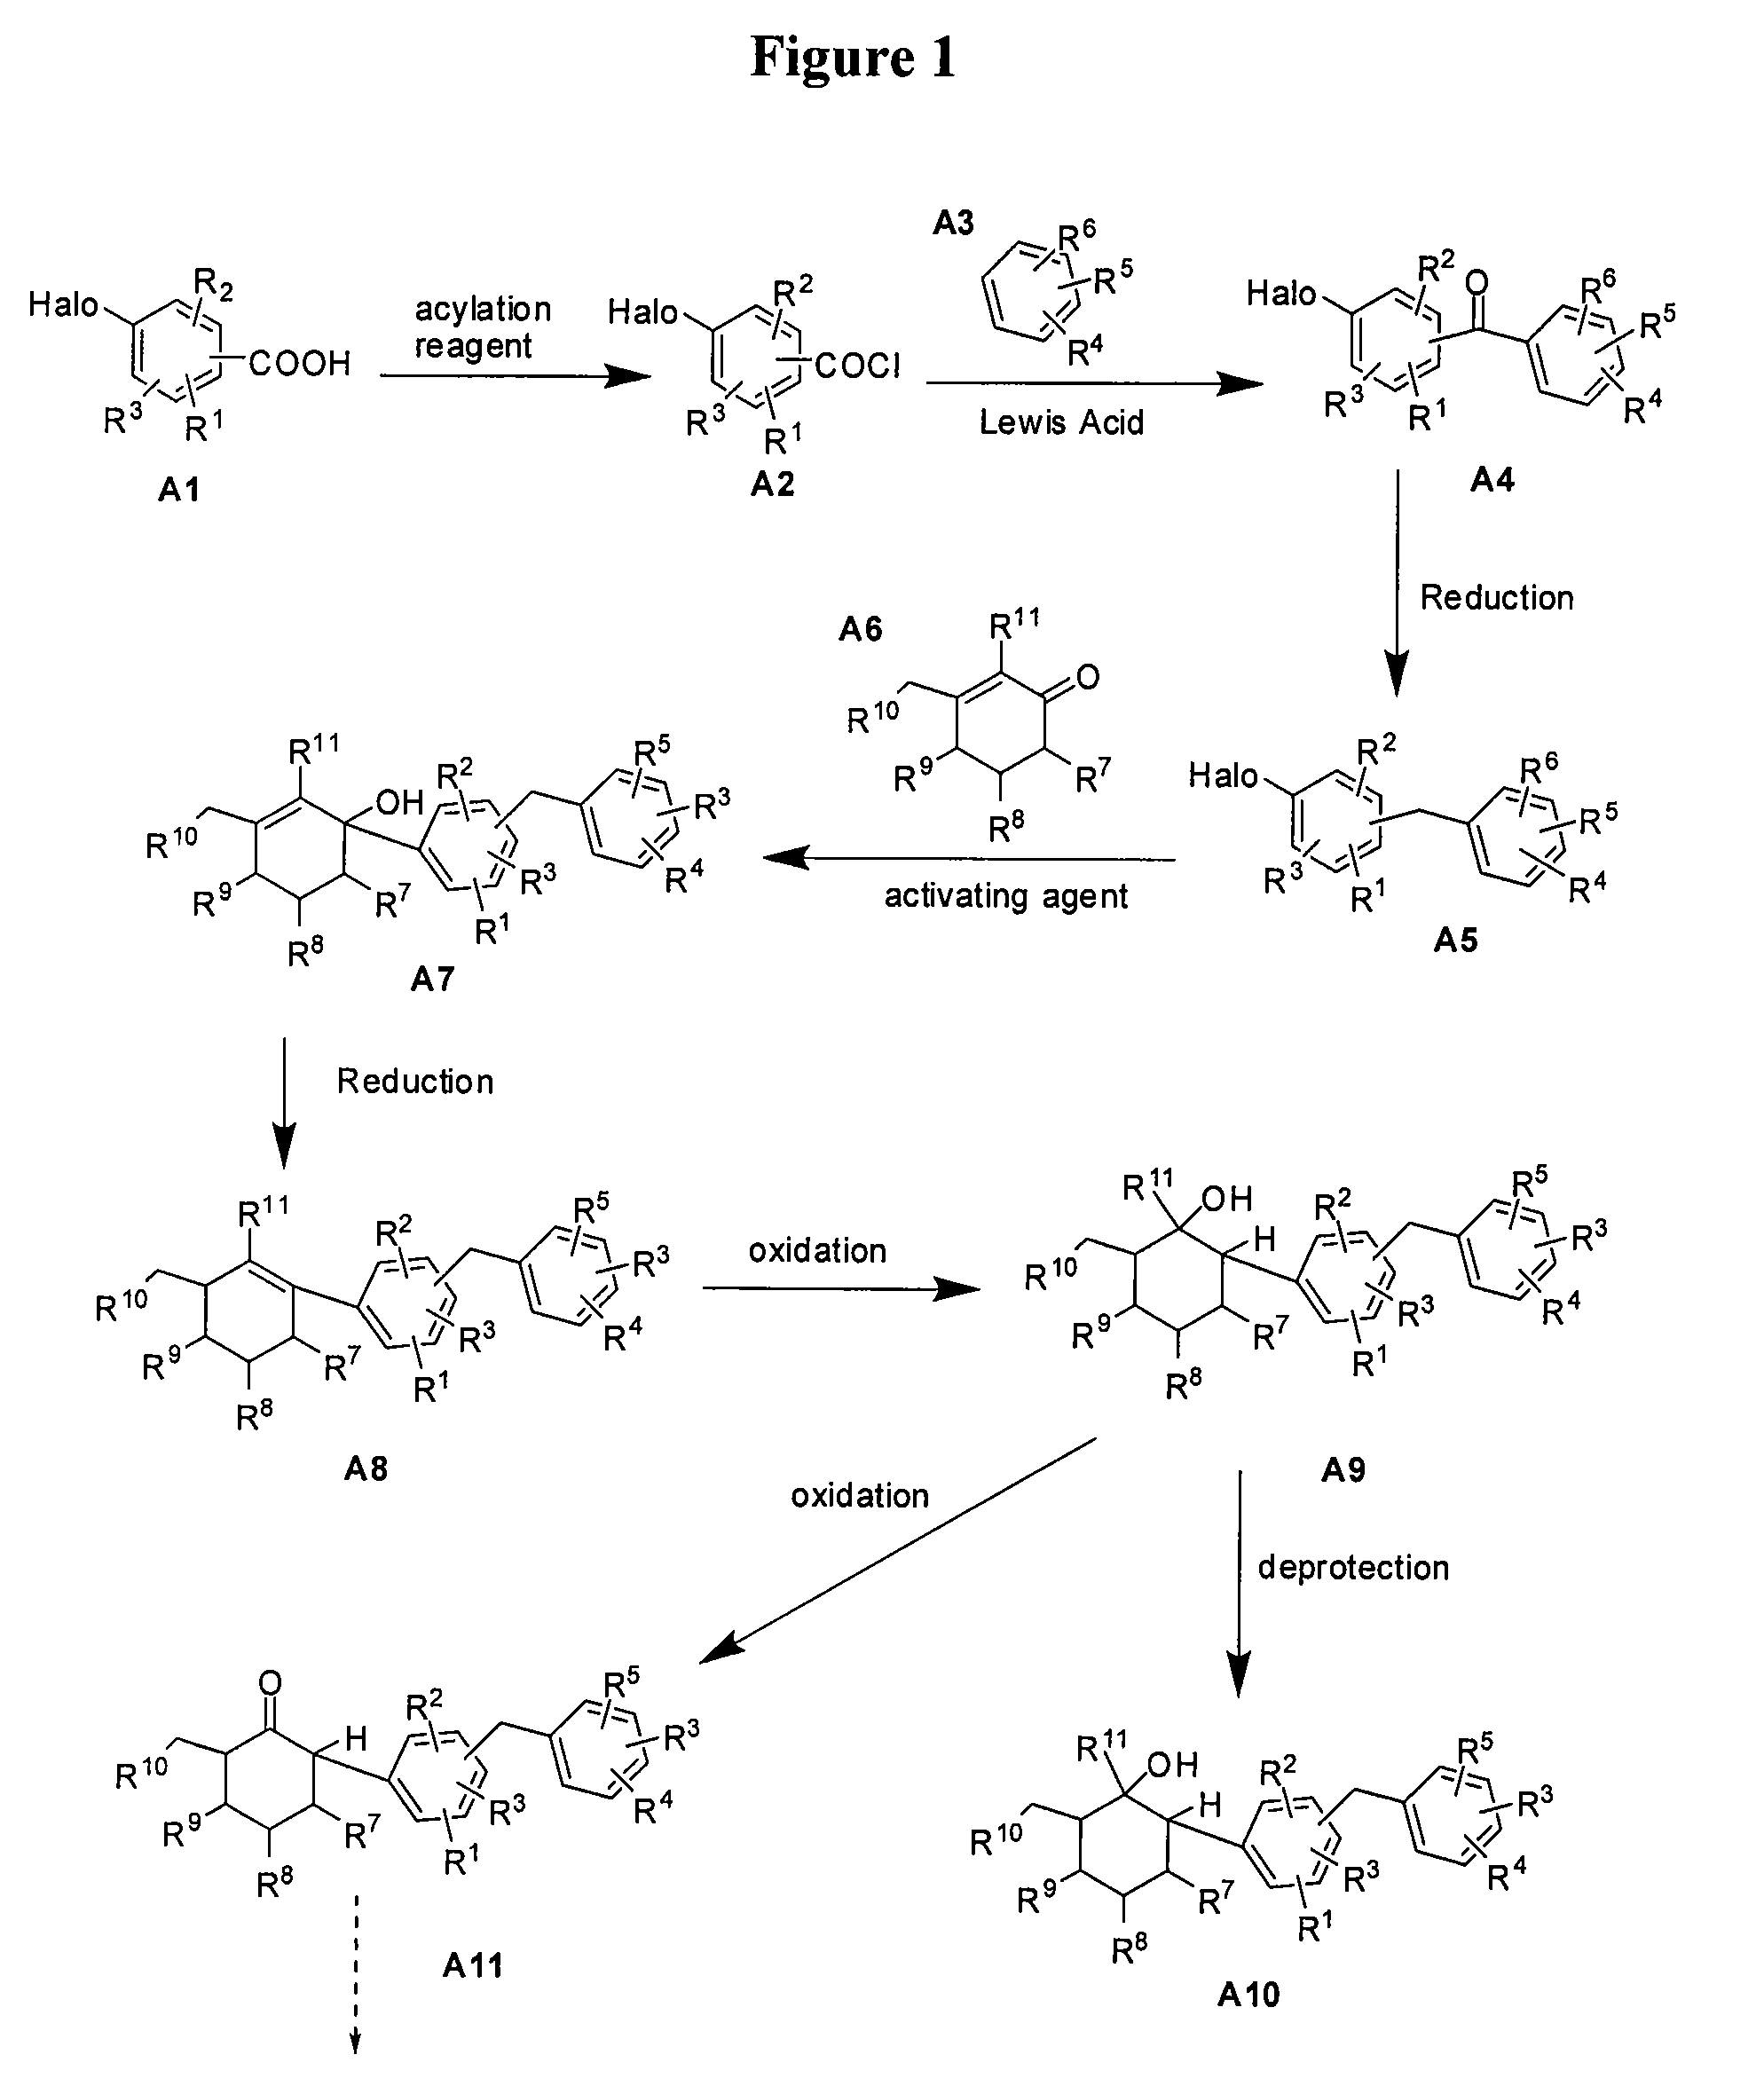 Benzylphenyl cyclohexane derivatives and methods of use